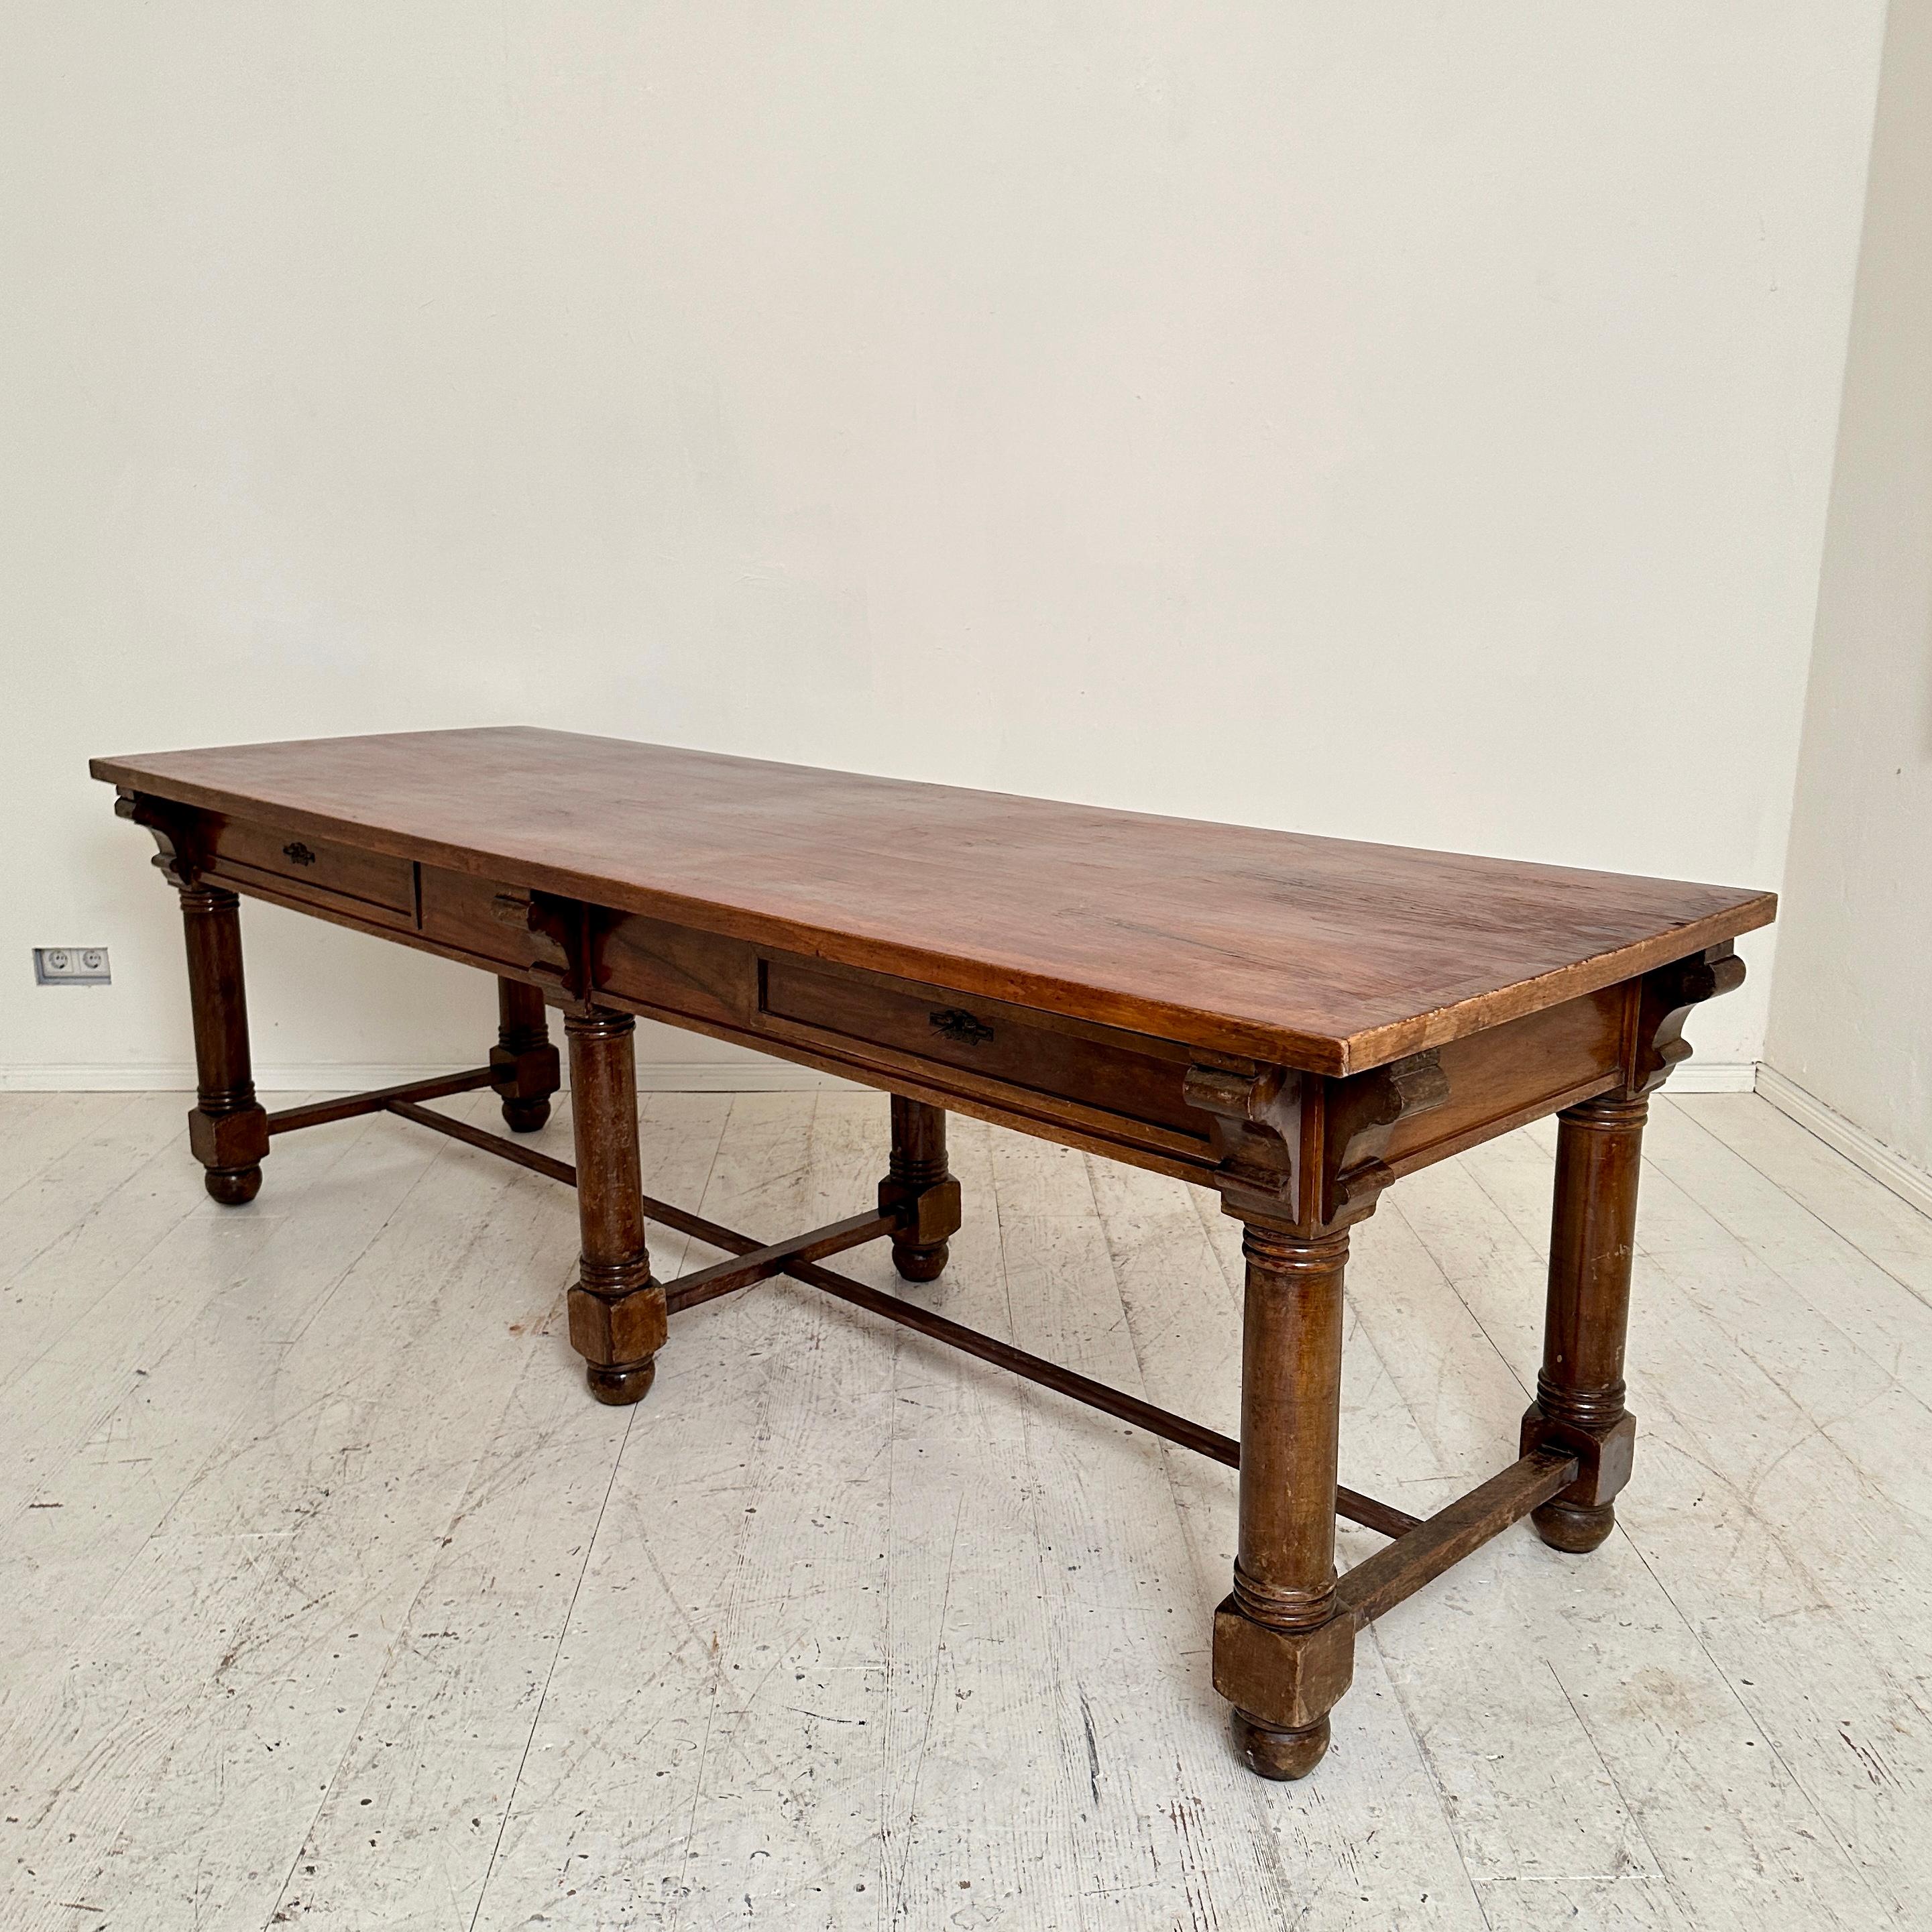 Late 19th Century Italian Large Brown Walnut Dining Table with 2 Drawers, 1880 For Sale 9